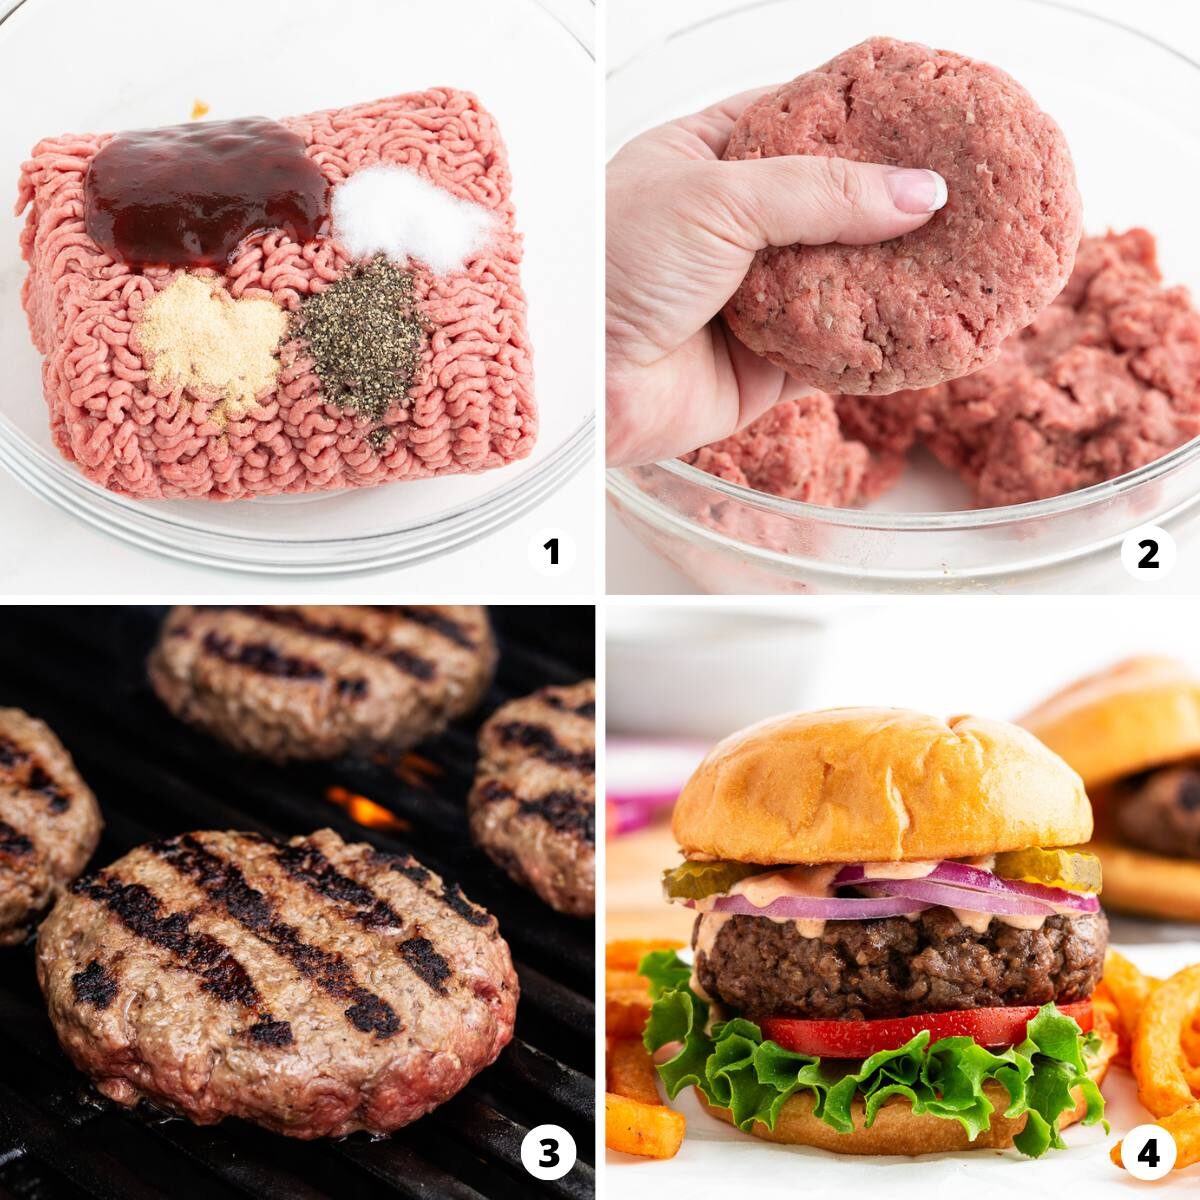 Showing how to make hamburgers in a 4 step collage.